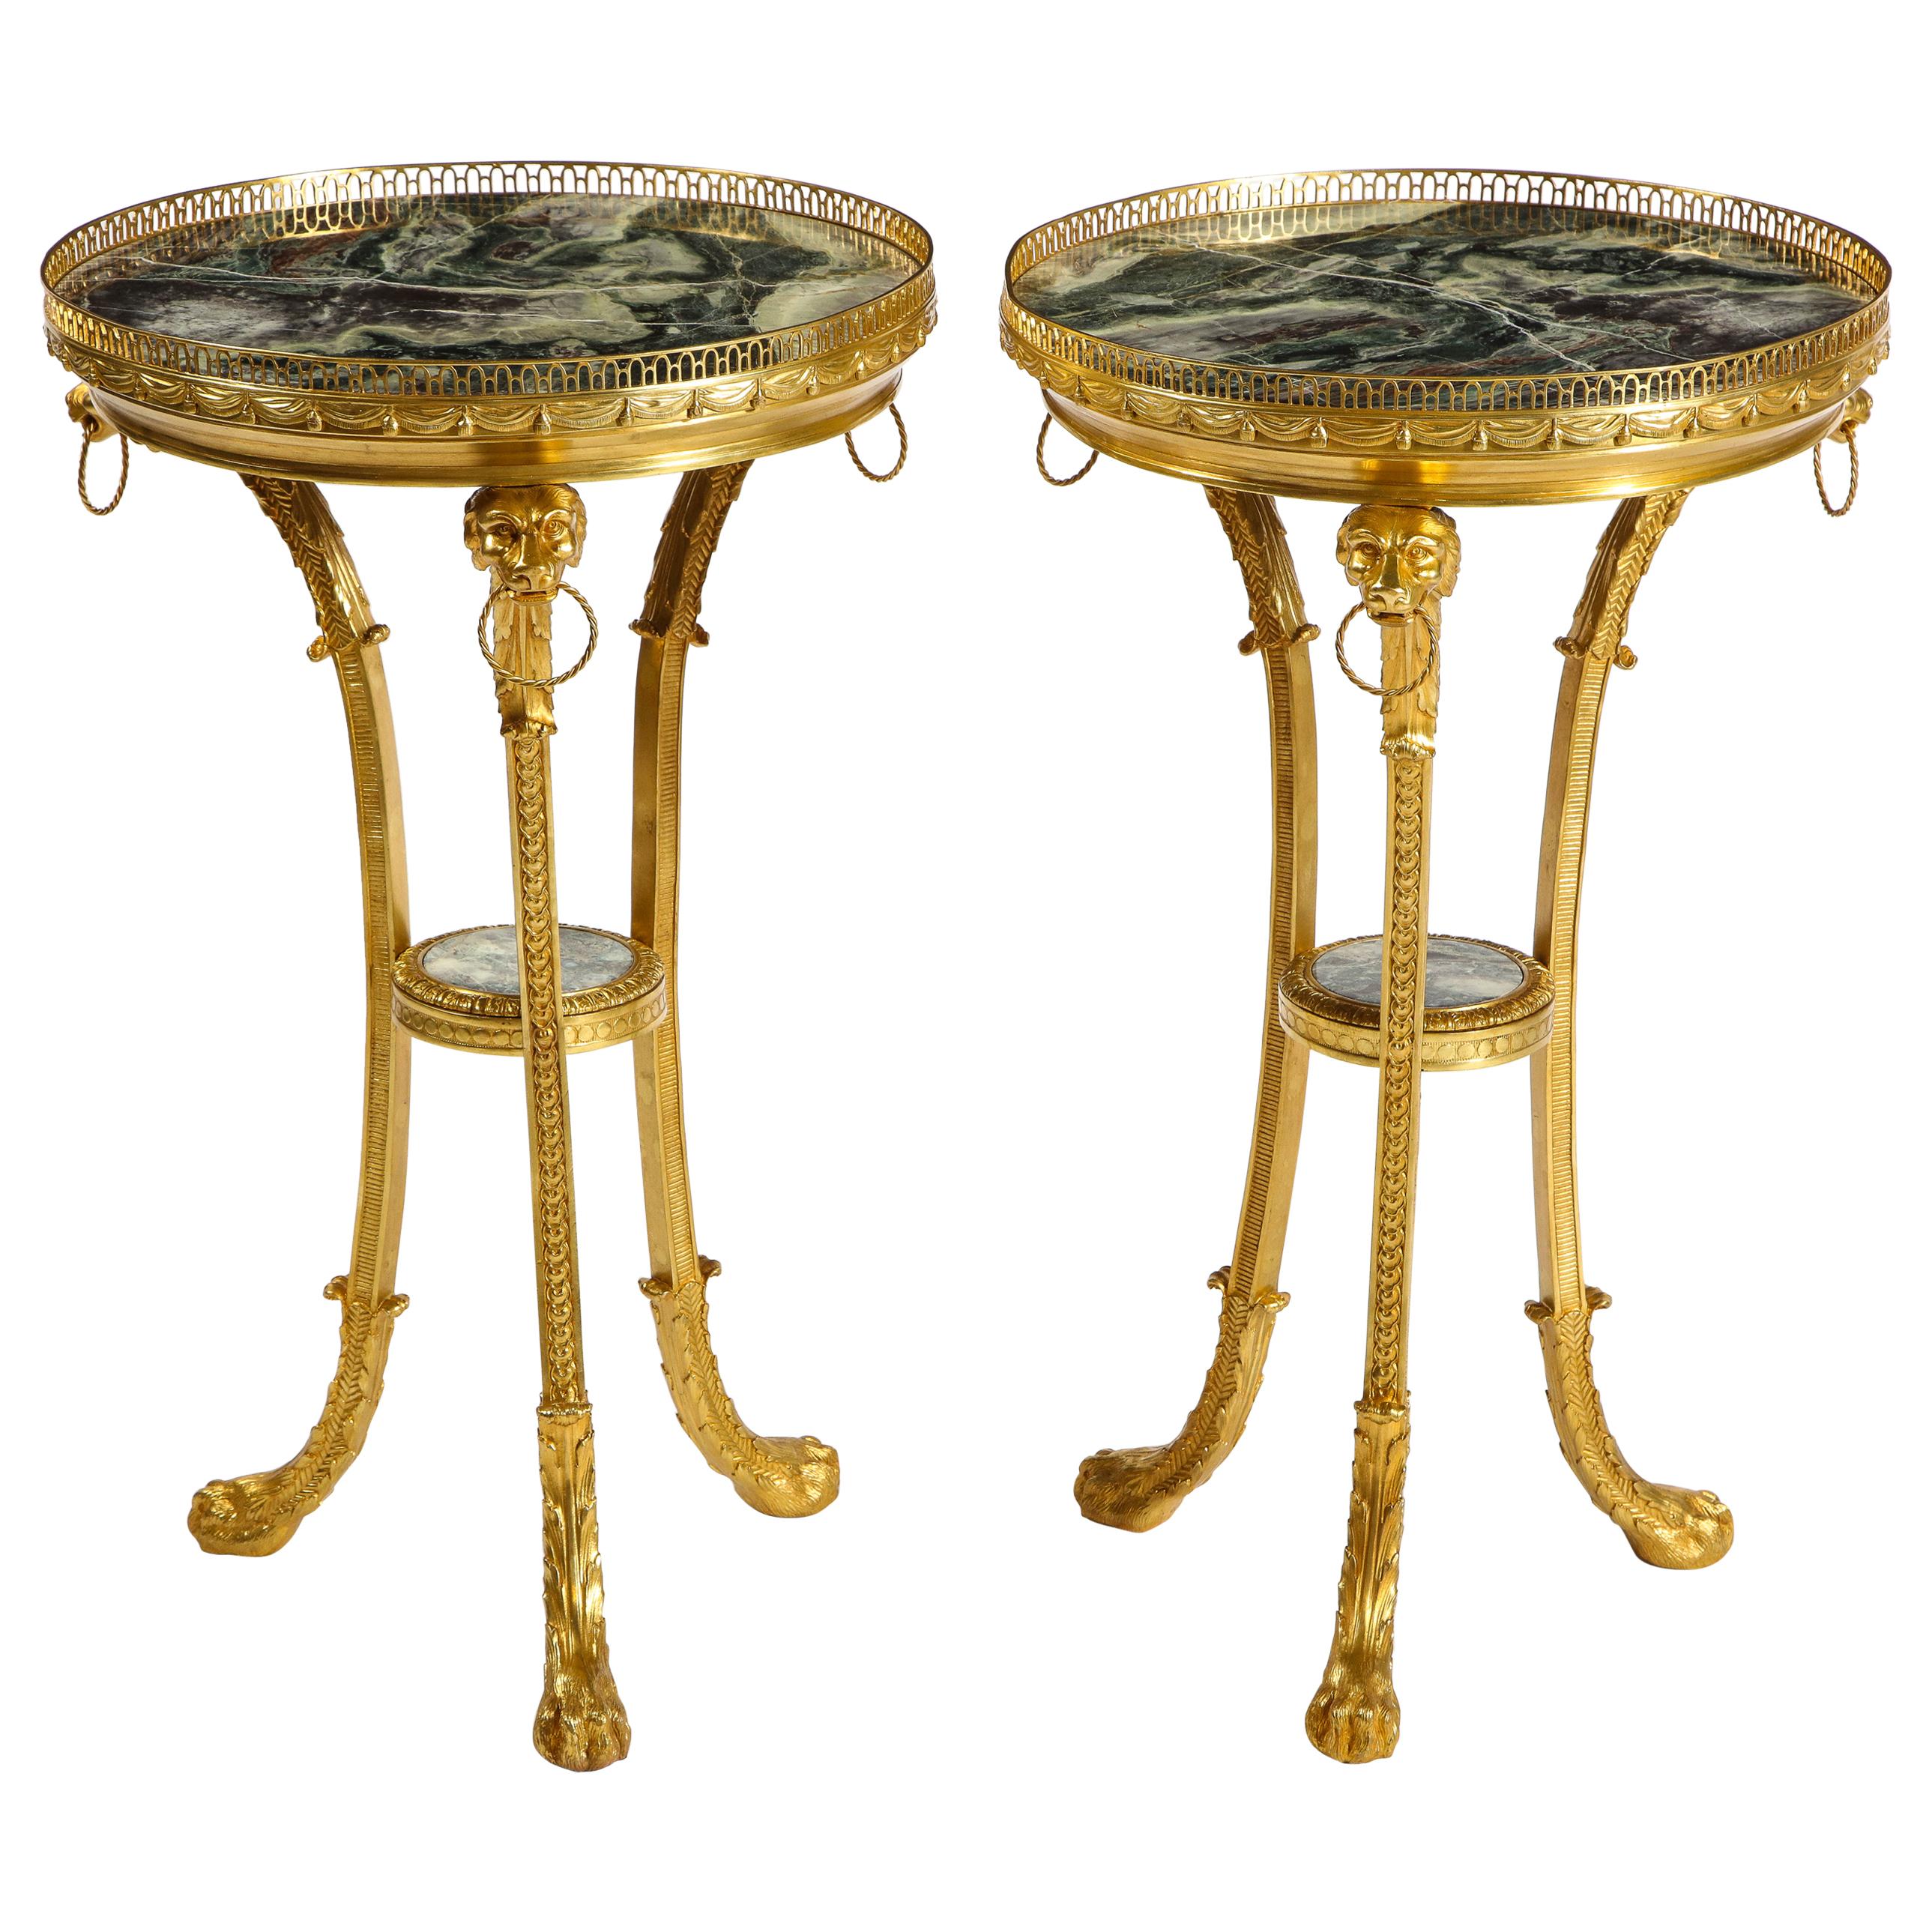 Pair of Russian Neoclassical Style Gilt Bronze and Marble-Top Guéridons